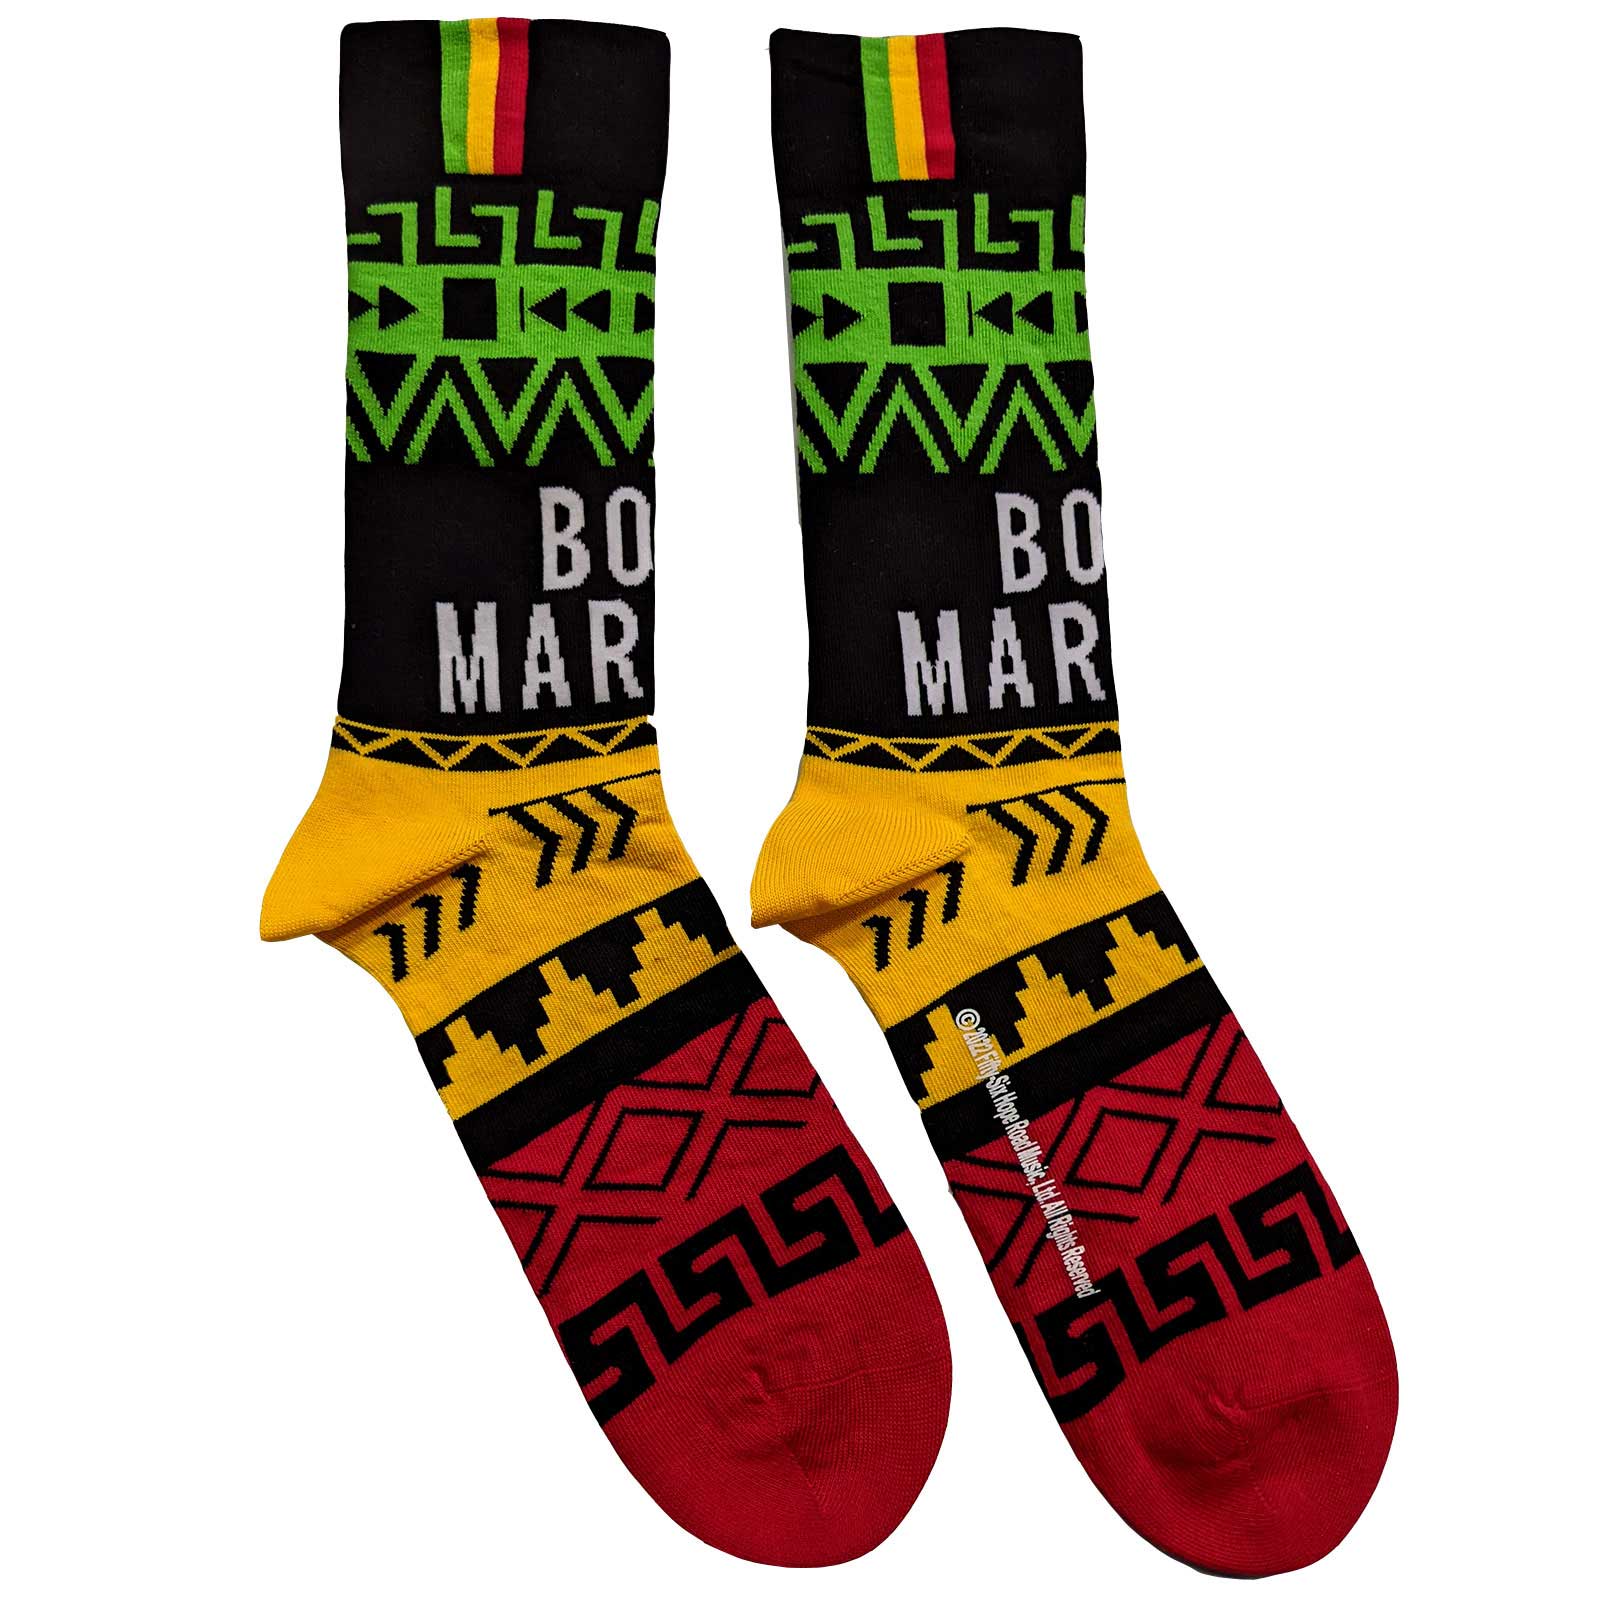 Chaussettes unisexes Bob Marley - Press Play (taille UK 7-11)